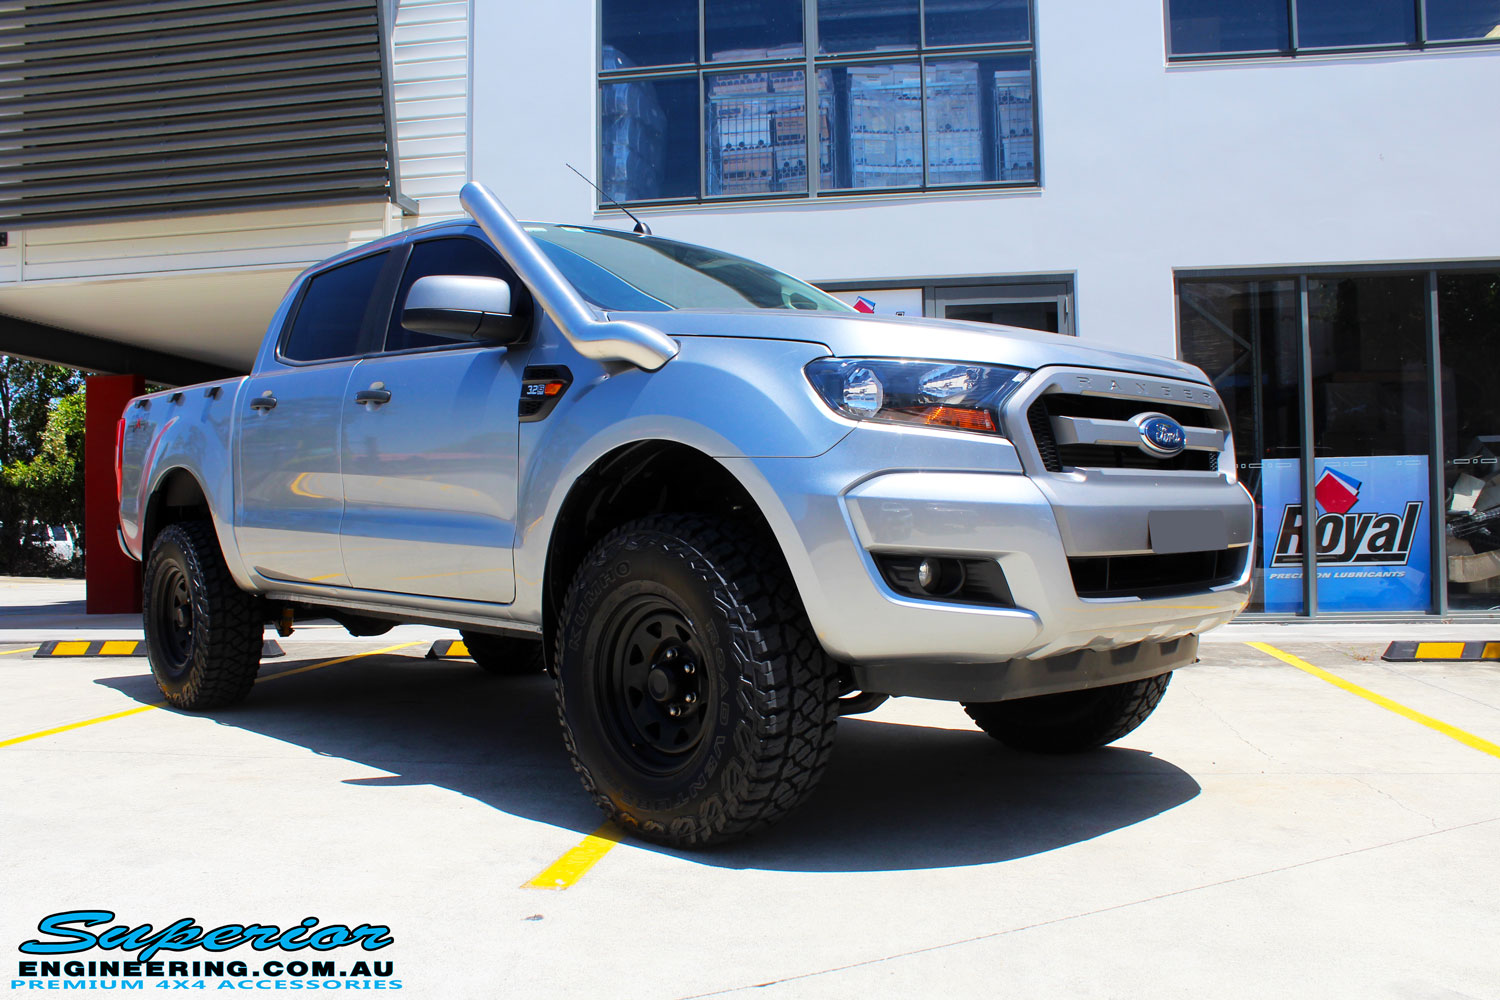 Right front side view of a Silver Ford PXII Ranger after fitment of a Bilstein 2" Inch Lift Kit with King Springs & EFS Leaf Springs